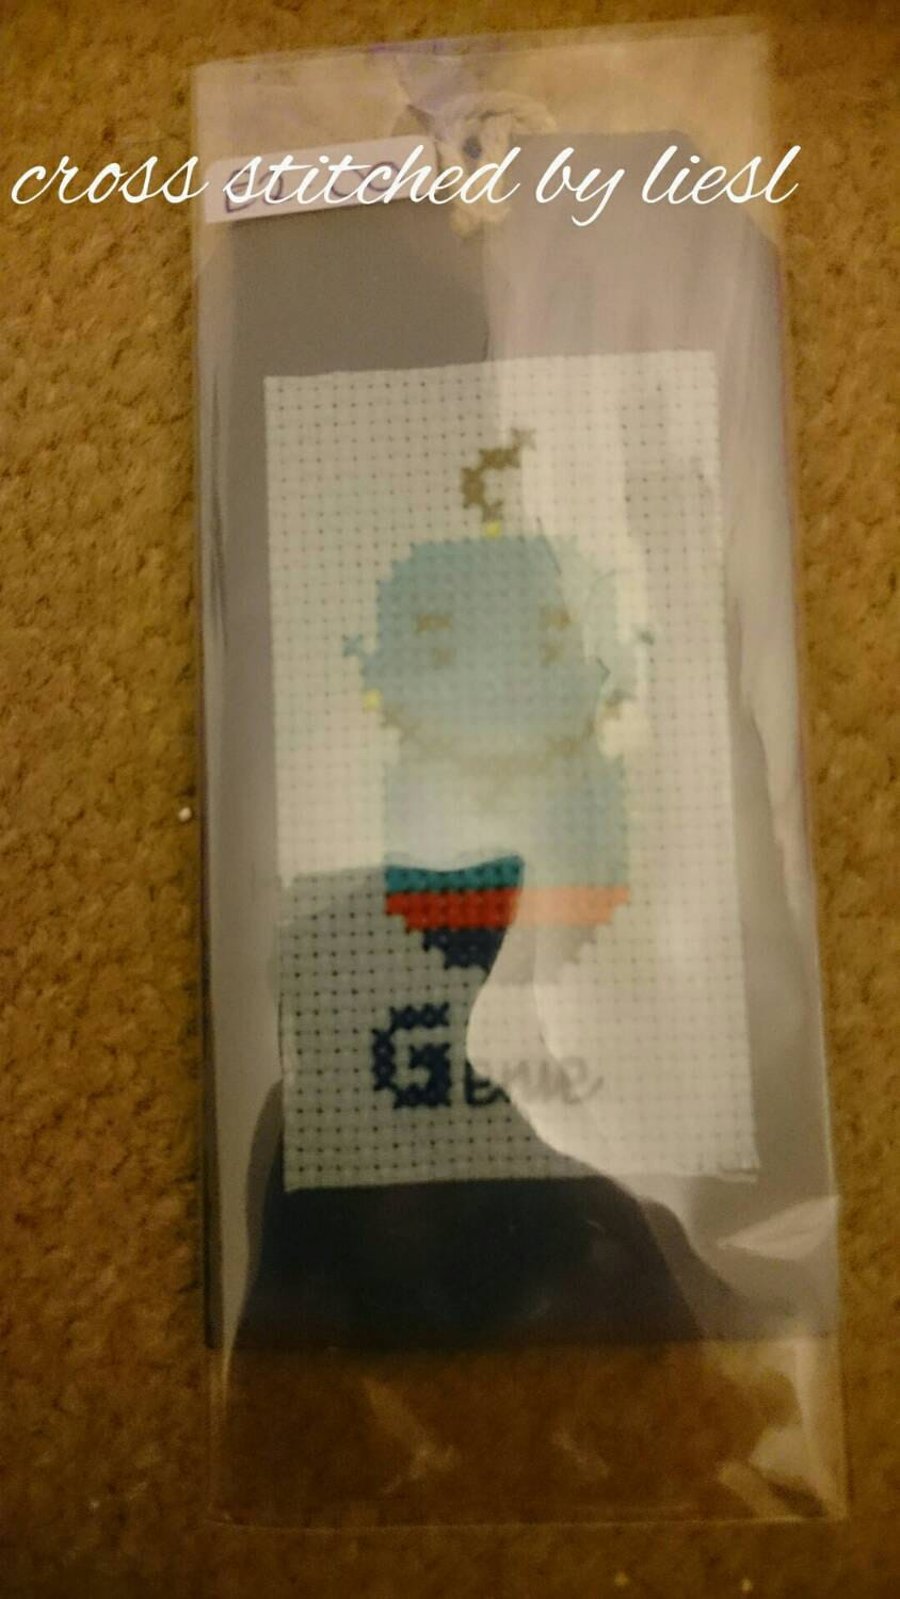 Cute cross stitched genie gift tag. Make that present more special by adding thi